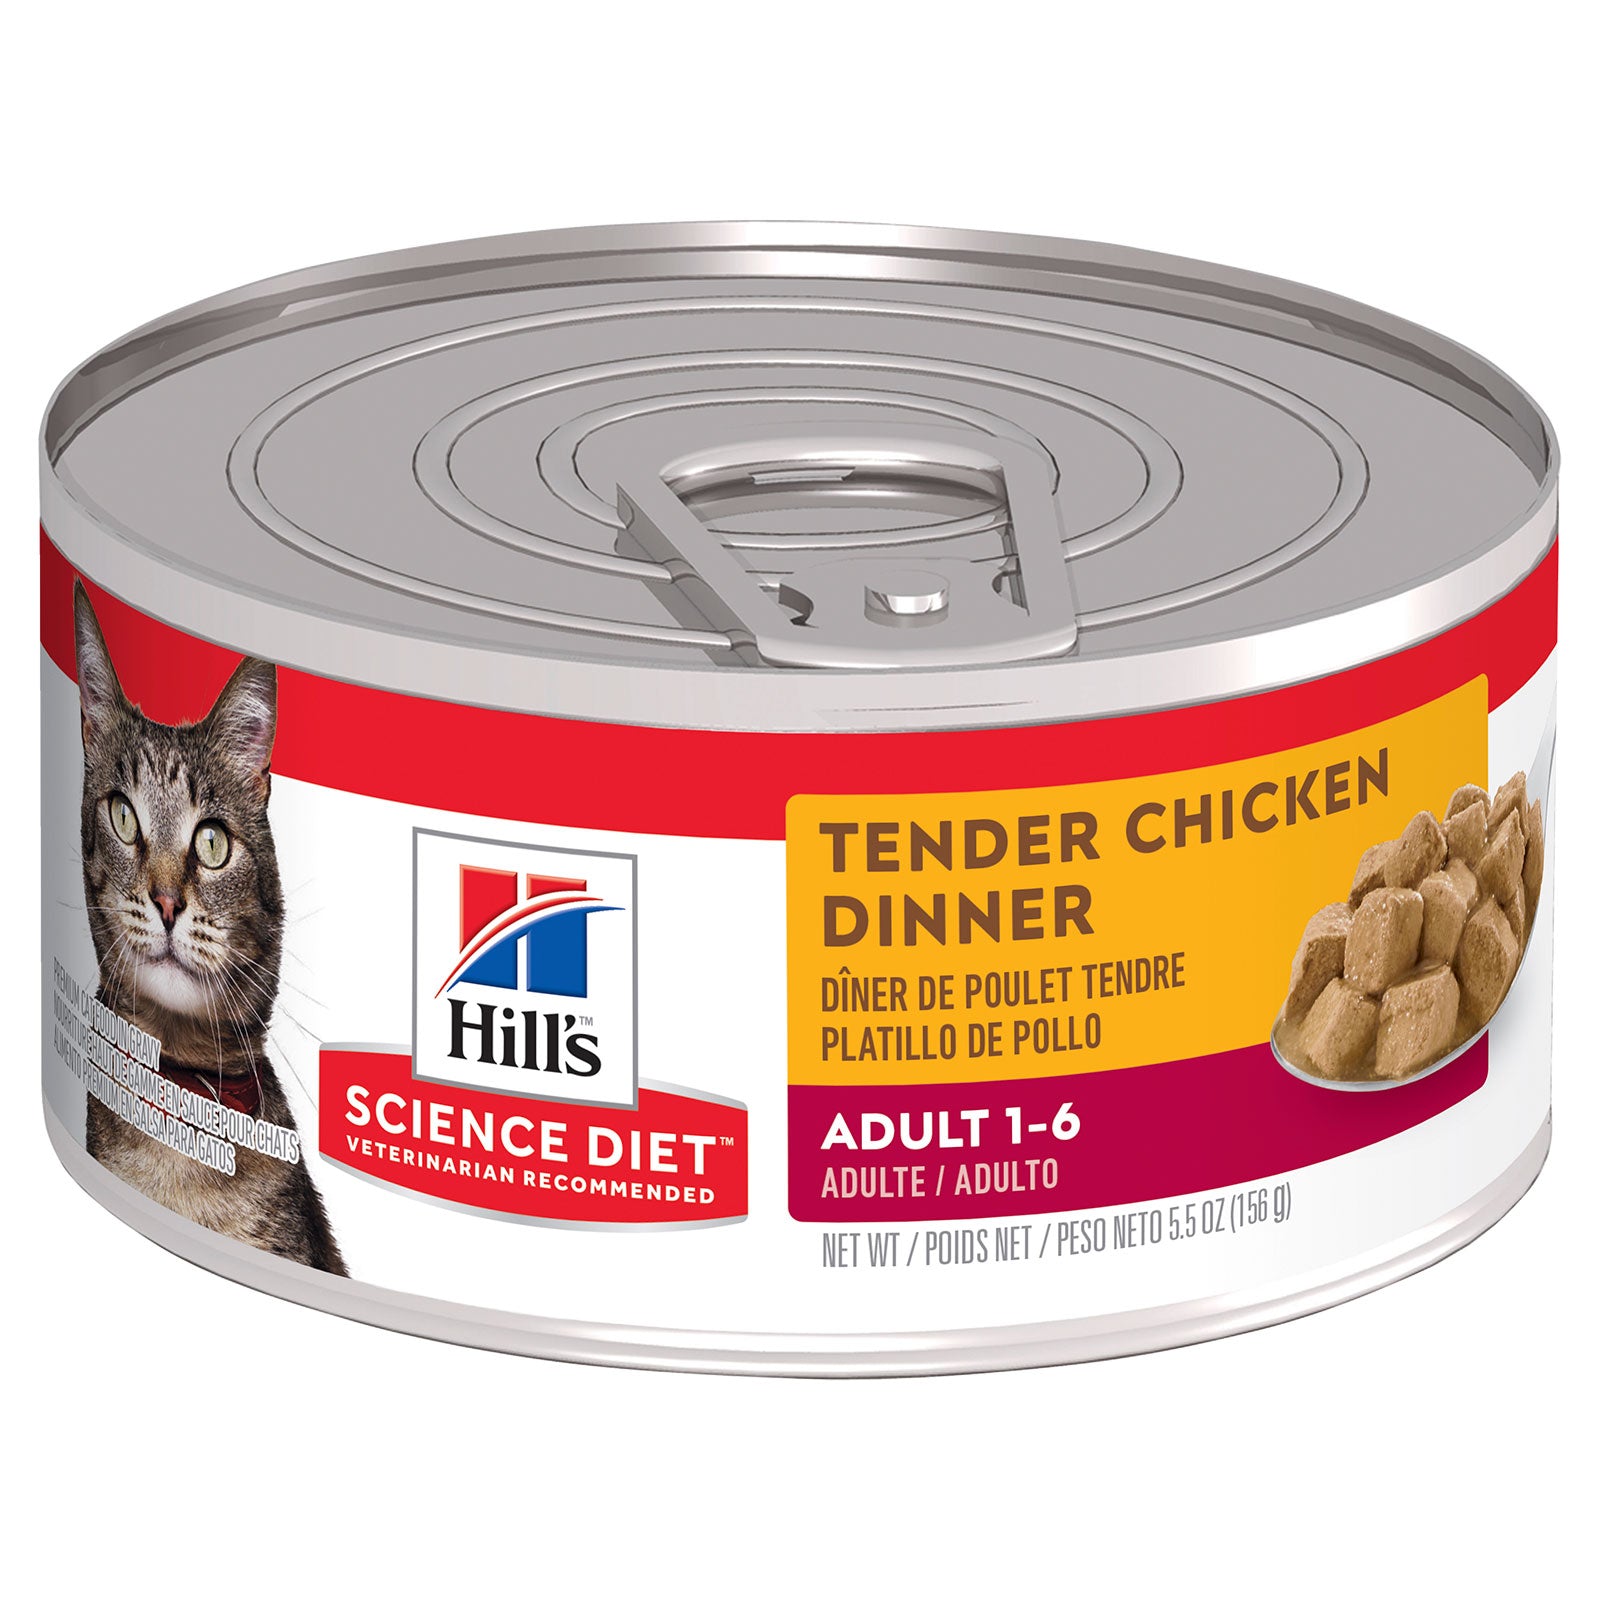 Hill's Science Diet Cat Food Can Adult Tender Chicken Dinner